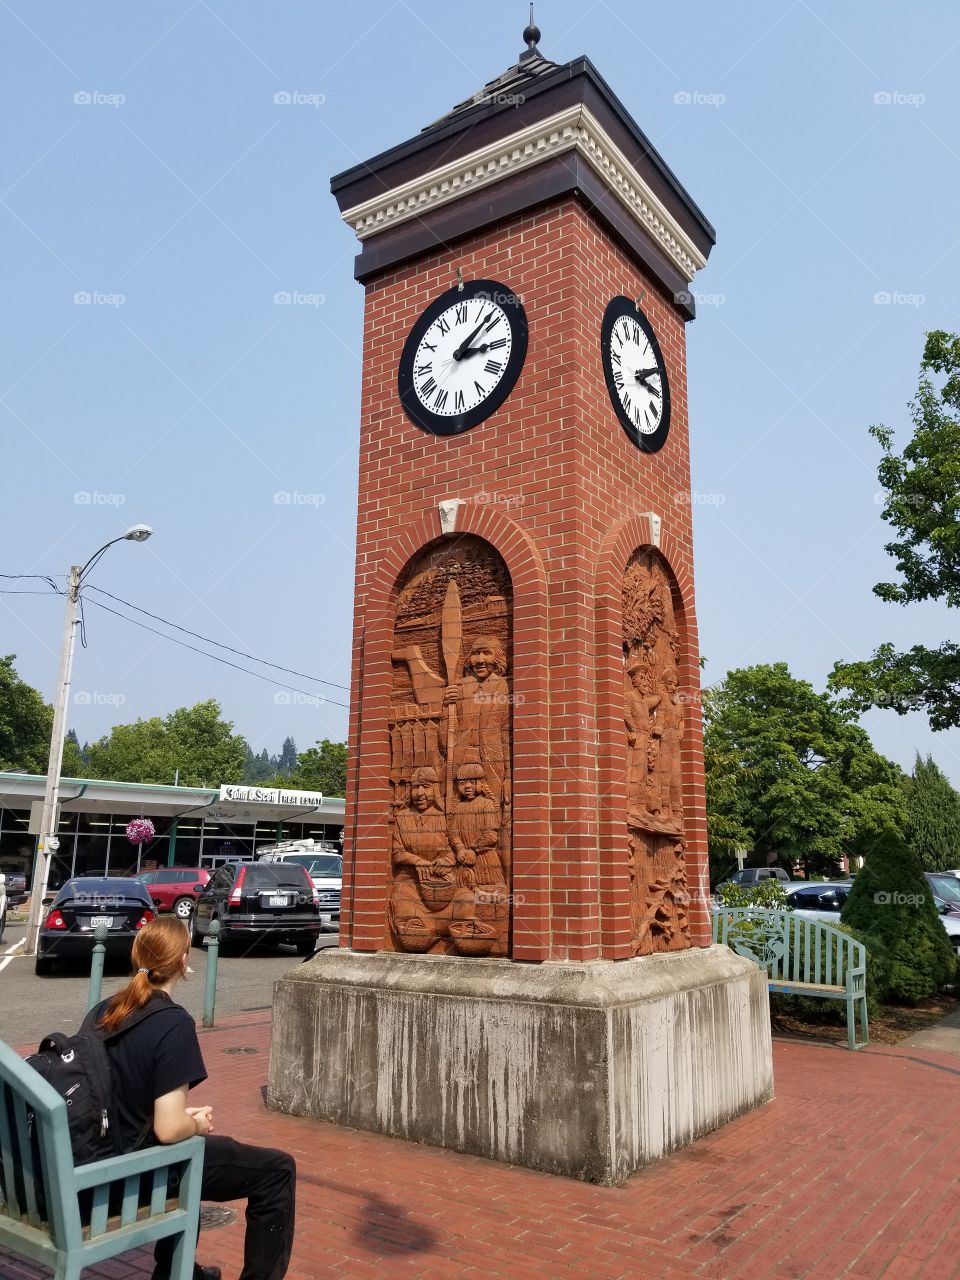 Clock Tower with lovely brick designs.